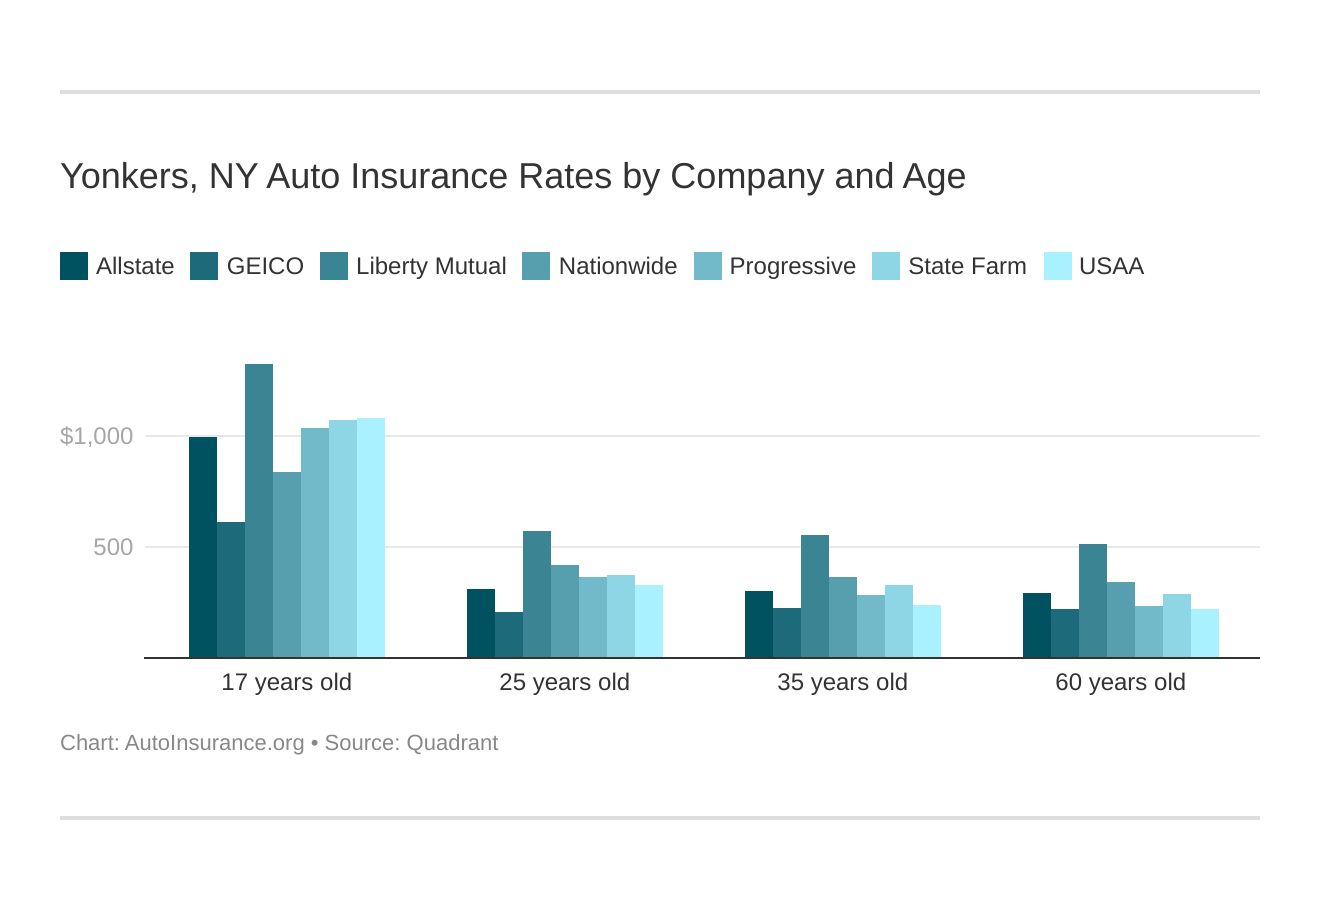 Yonkers, NY Auto Insurance Rates by Company and Age